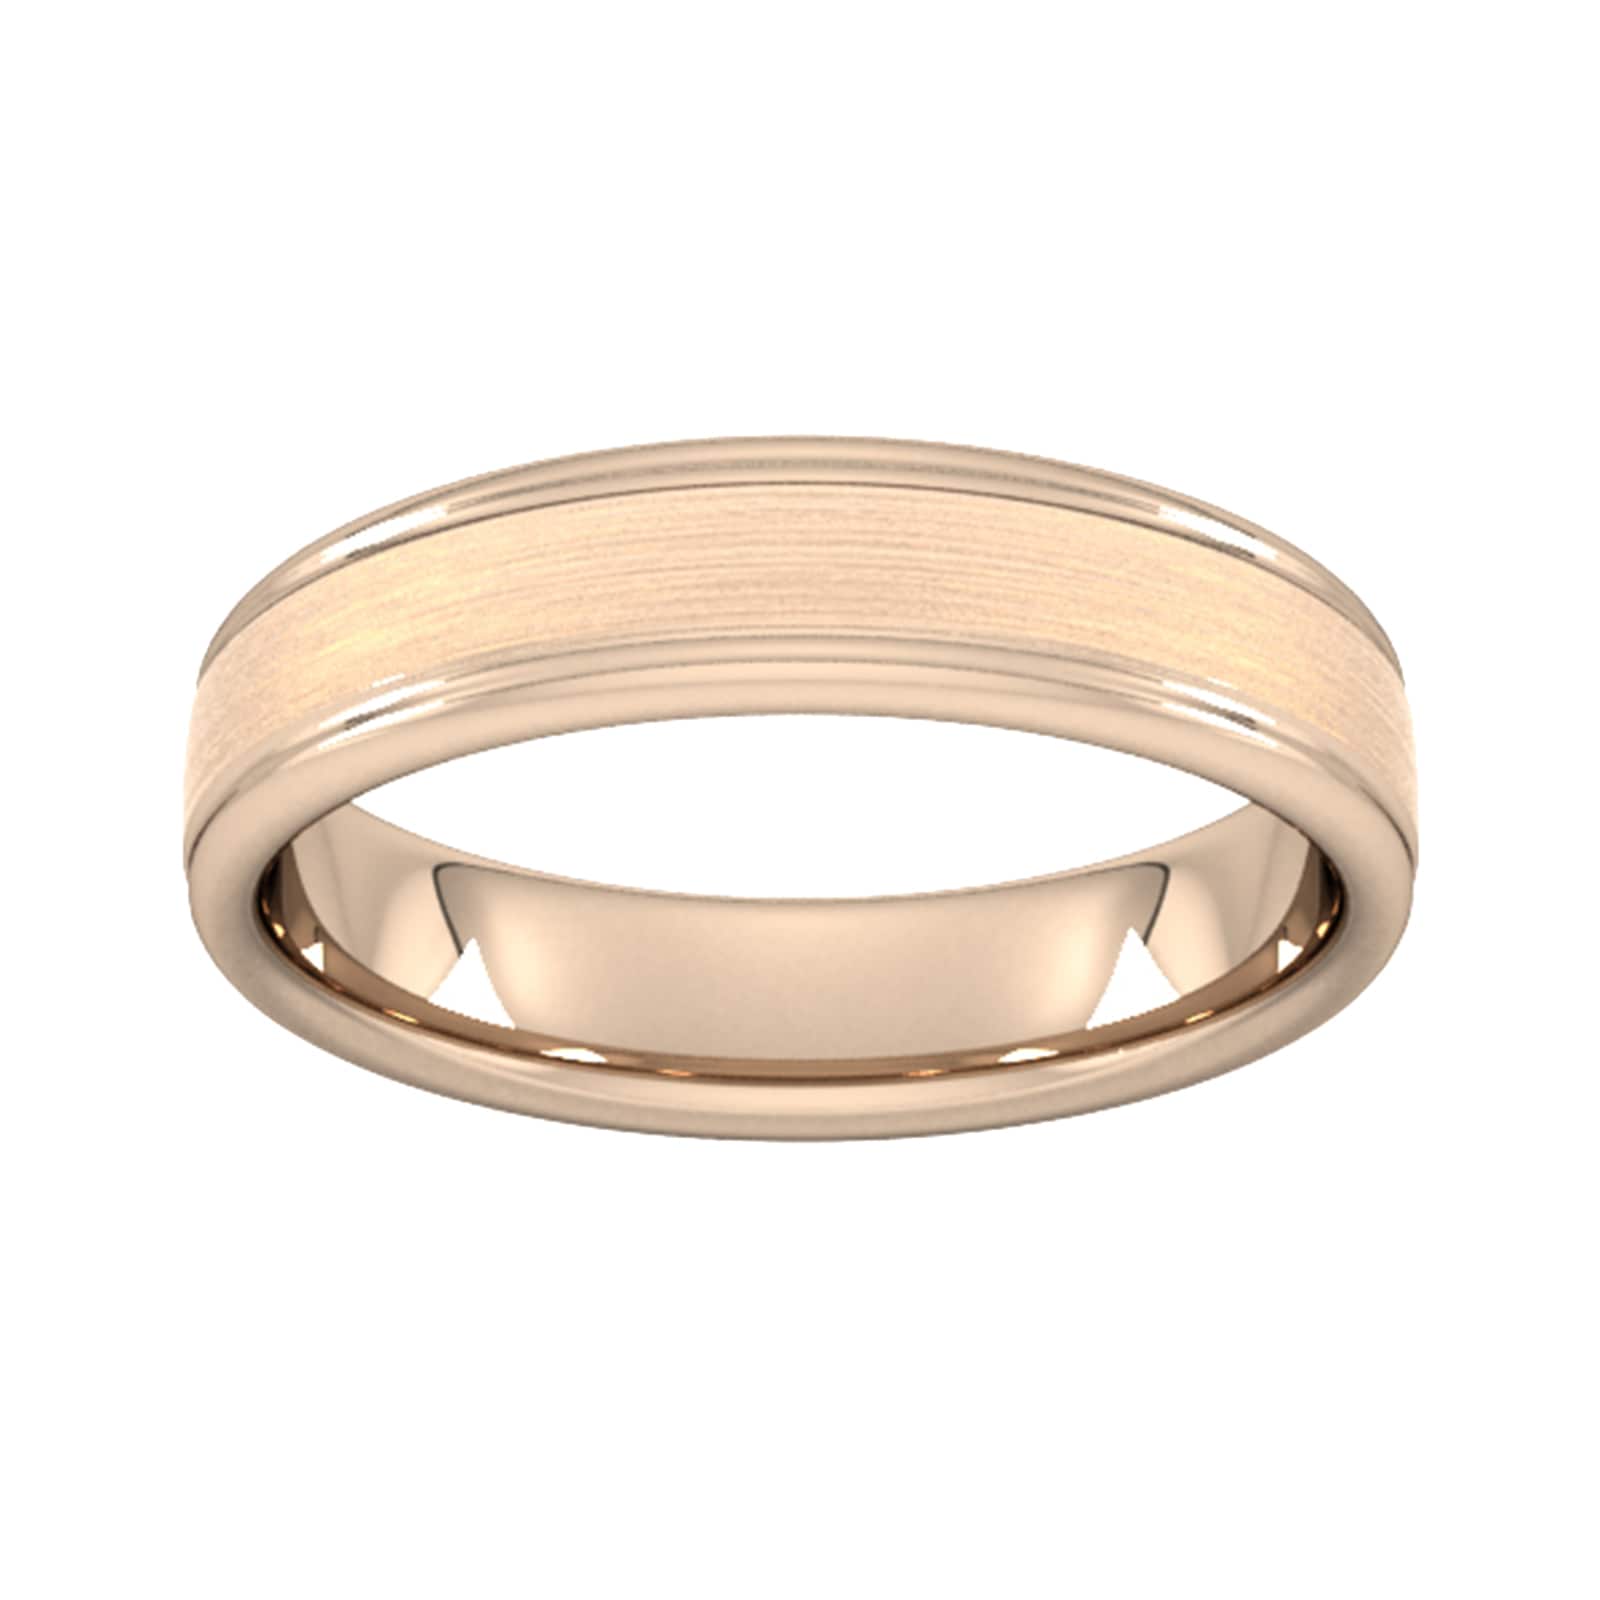 5mm Slight Court Extra Heavy Matt Centre With Grooves Wedding Ring In 9 Carat Rose Gold - Ring Size X